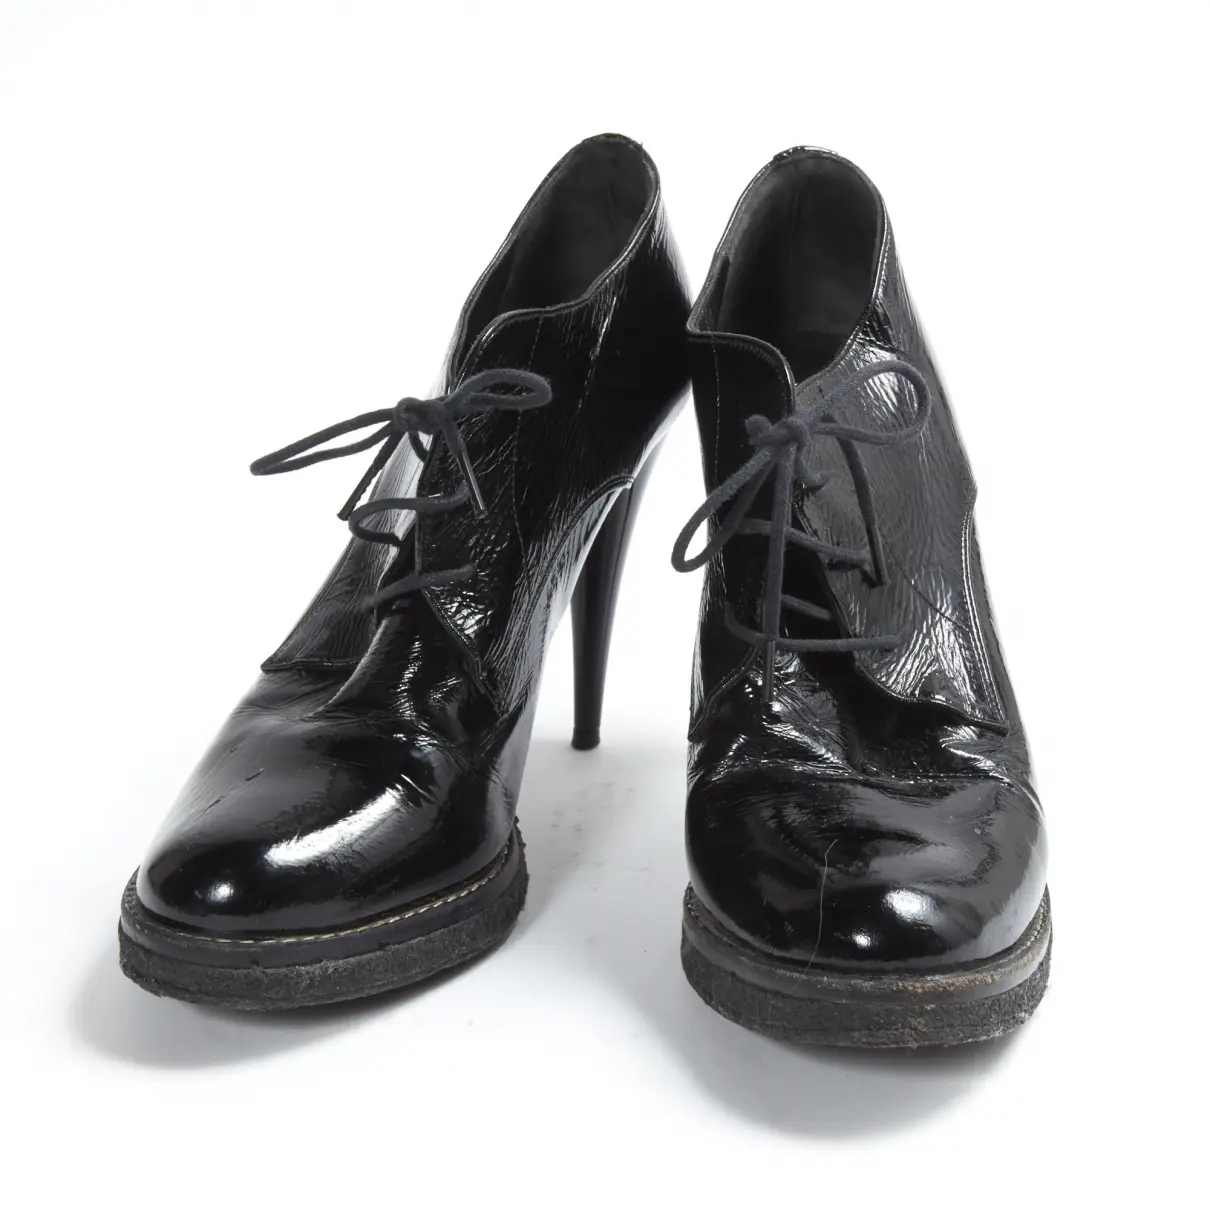 Balenciaga Patent leather heels for sale